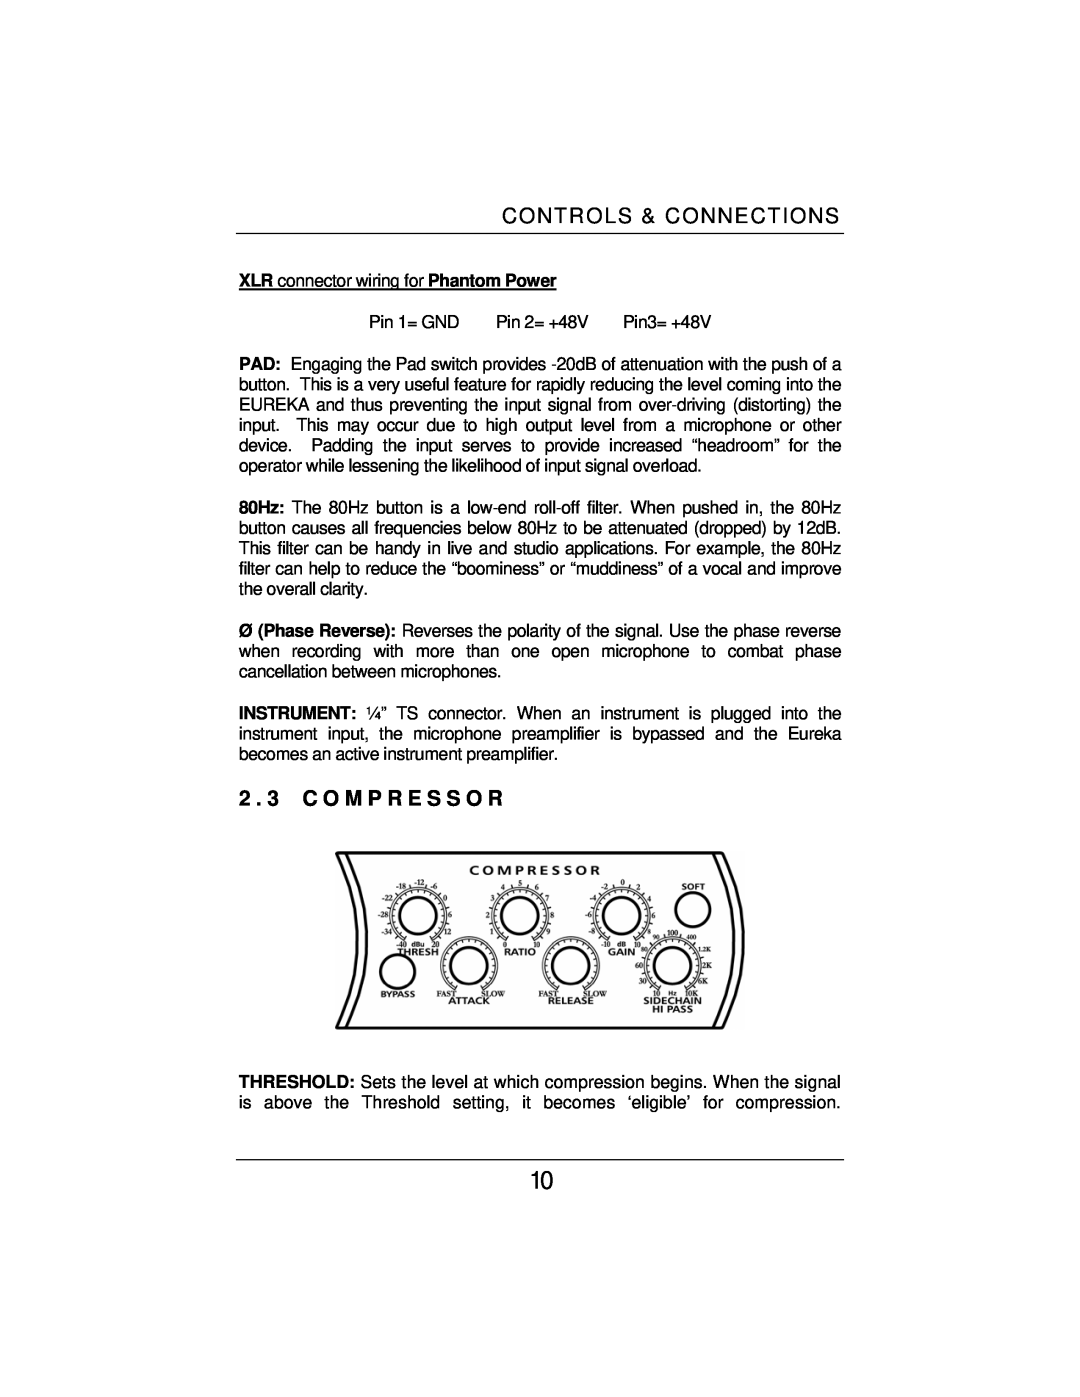 Eureka Microphone Preamplifier user manual 2 . 3 C O M P R E S S O R, Controls & Connections 